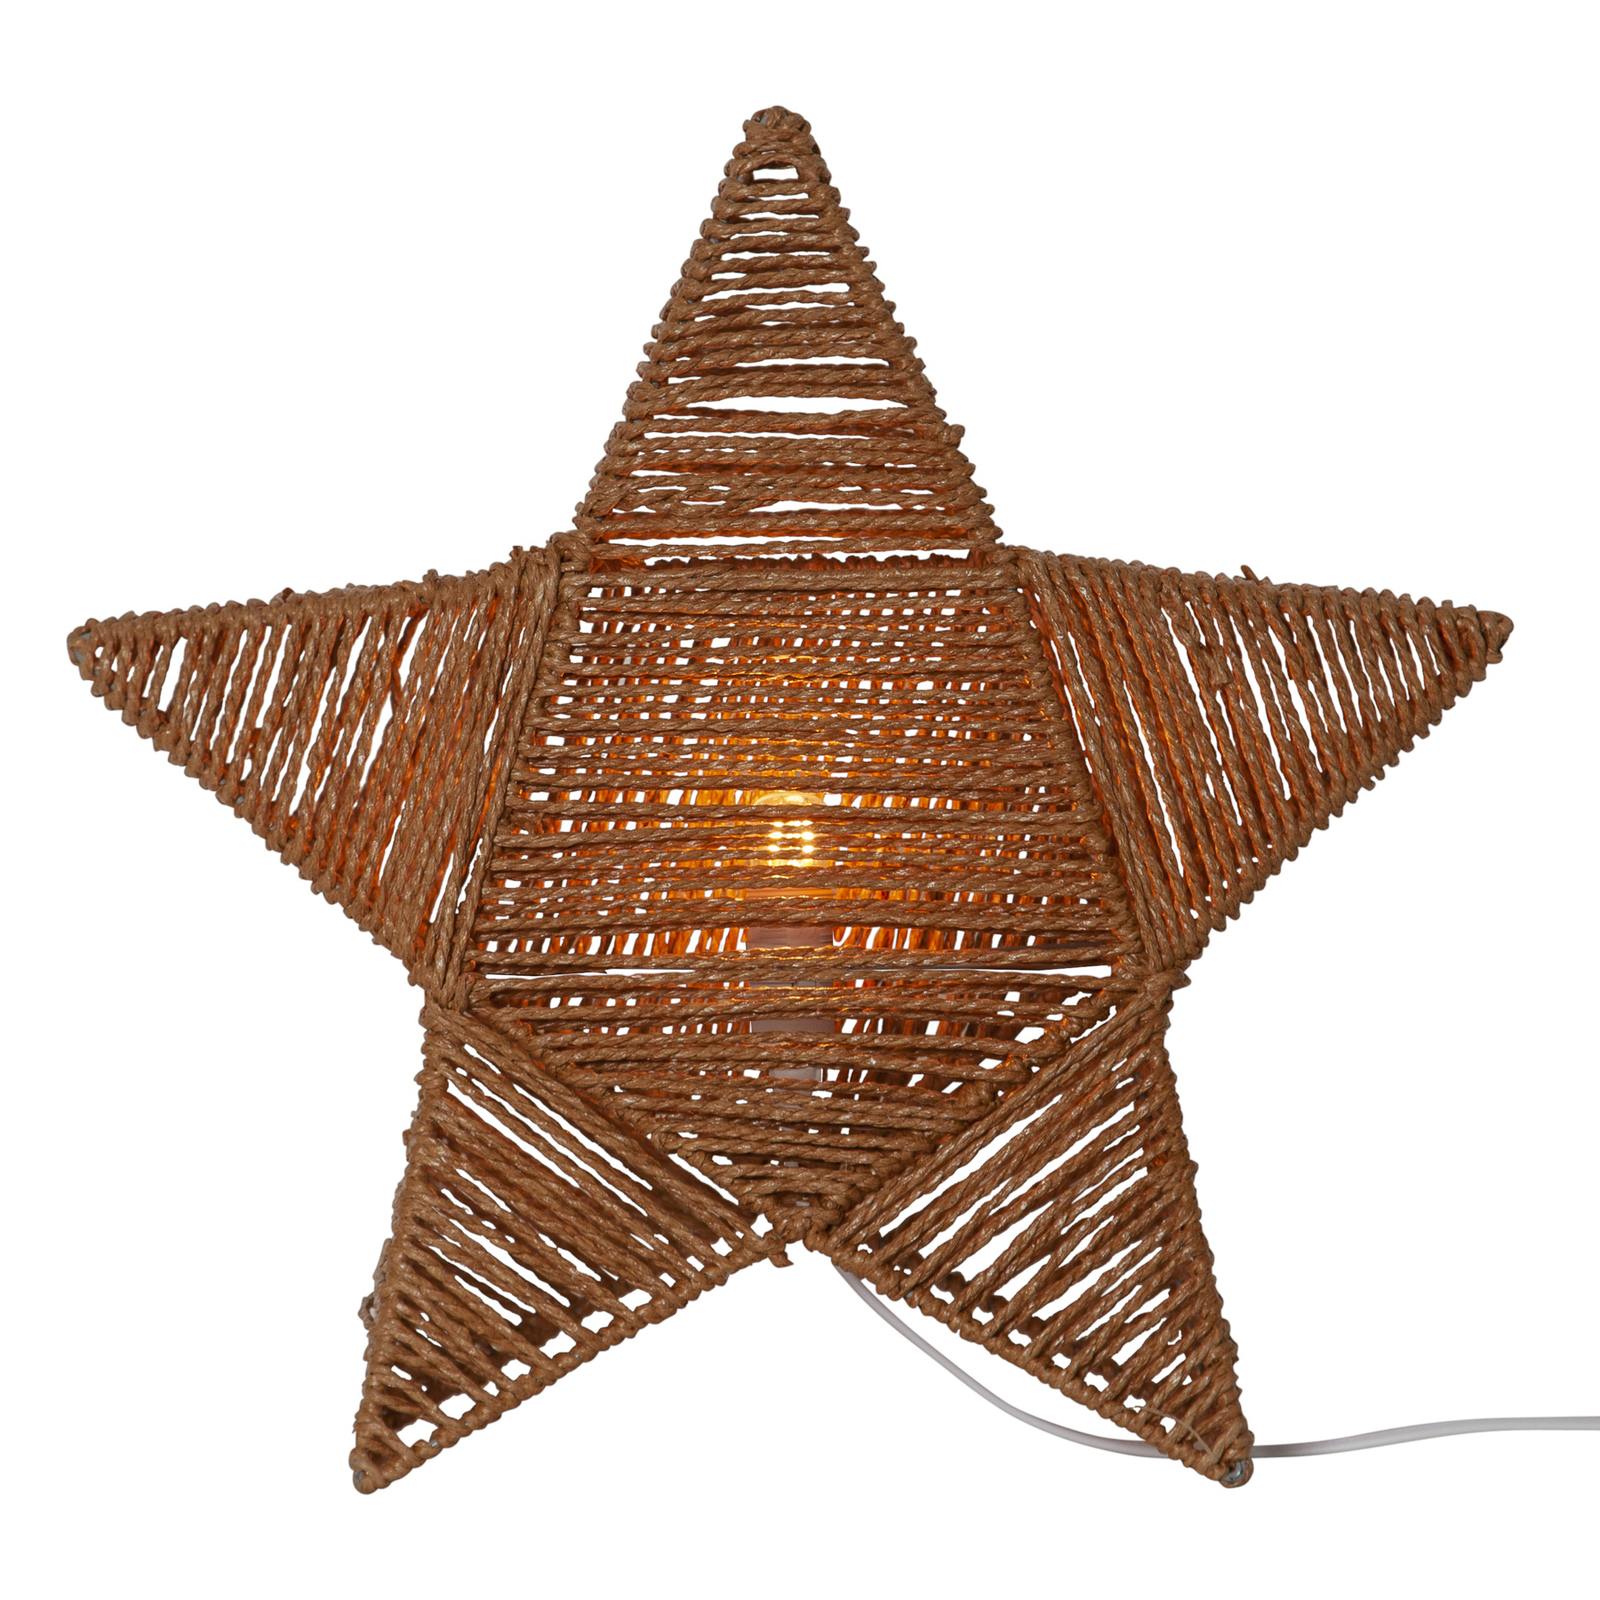 Rappe decorative star, paper strings, standing